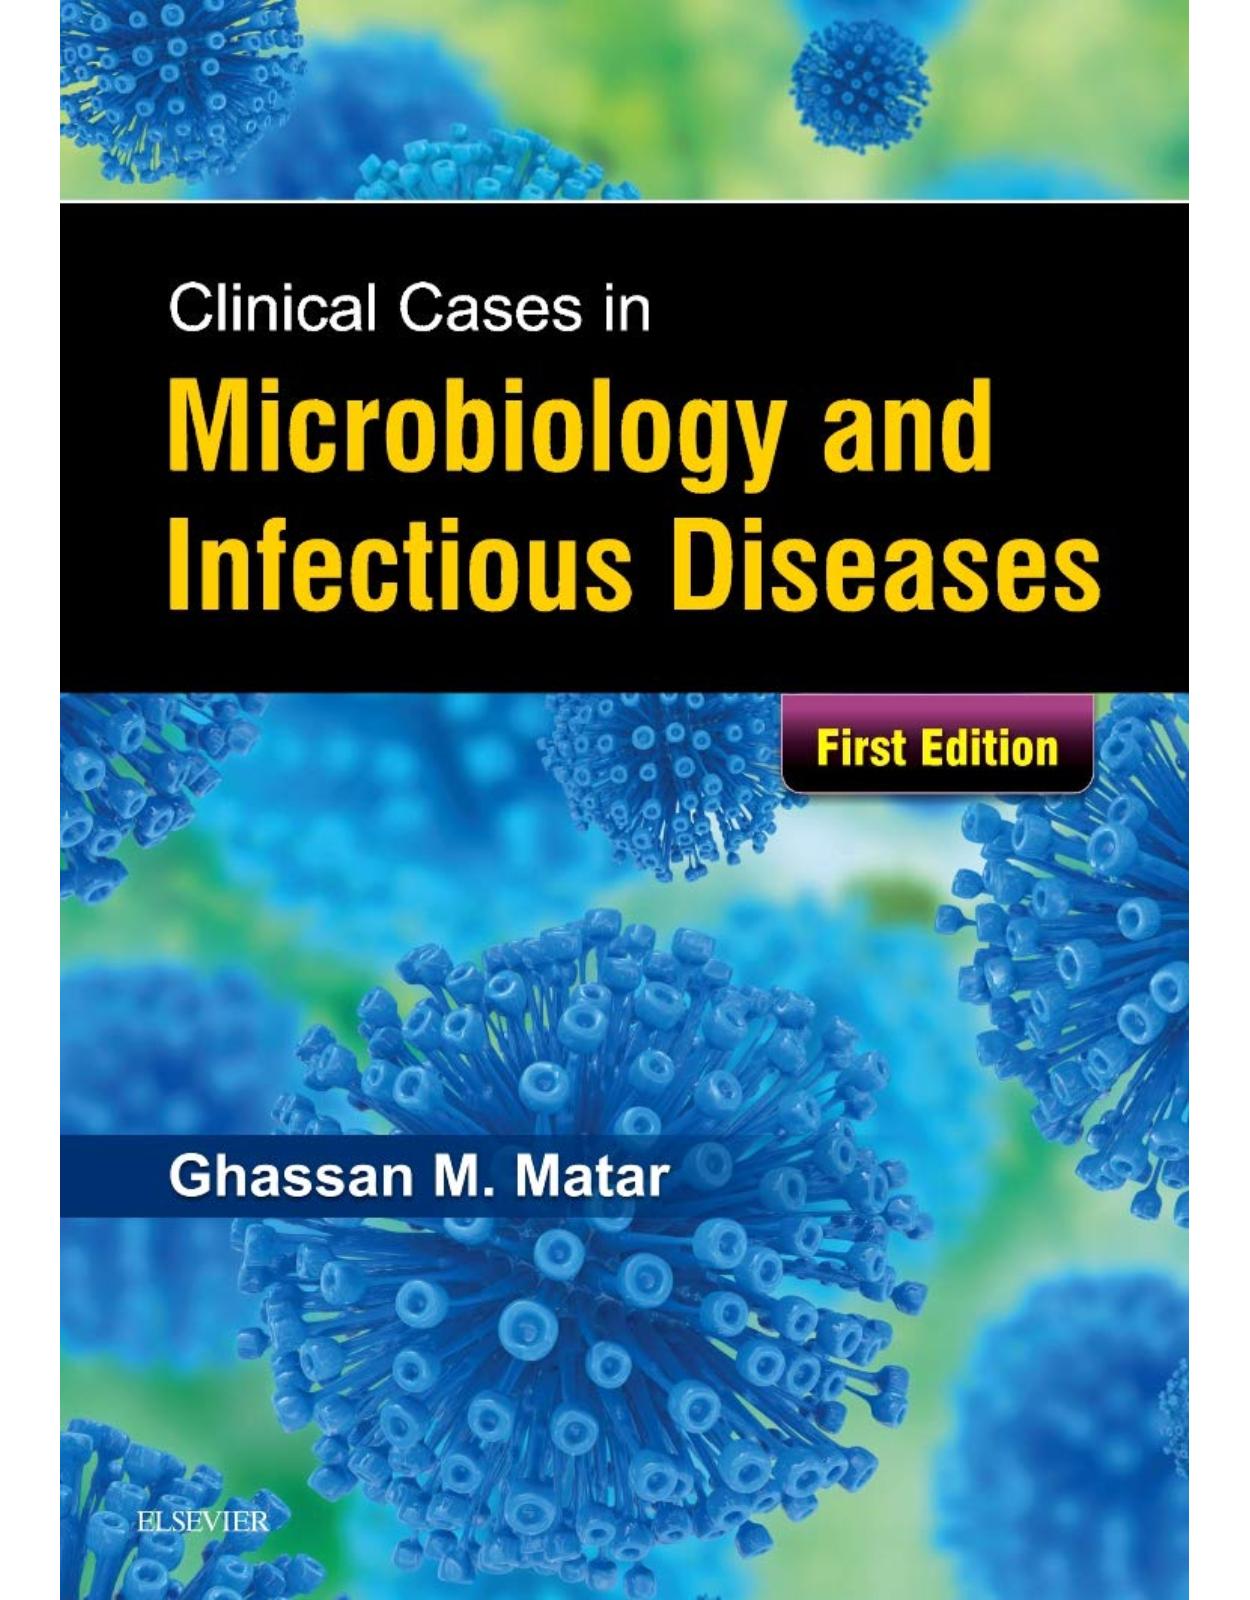 Clinical Cases in Microbiology and Infectious Diseases, 1e